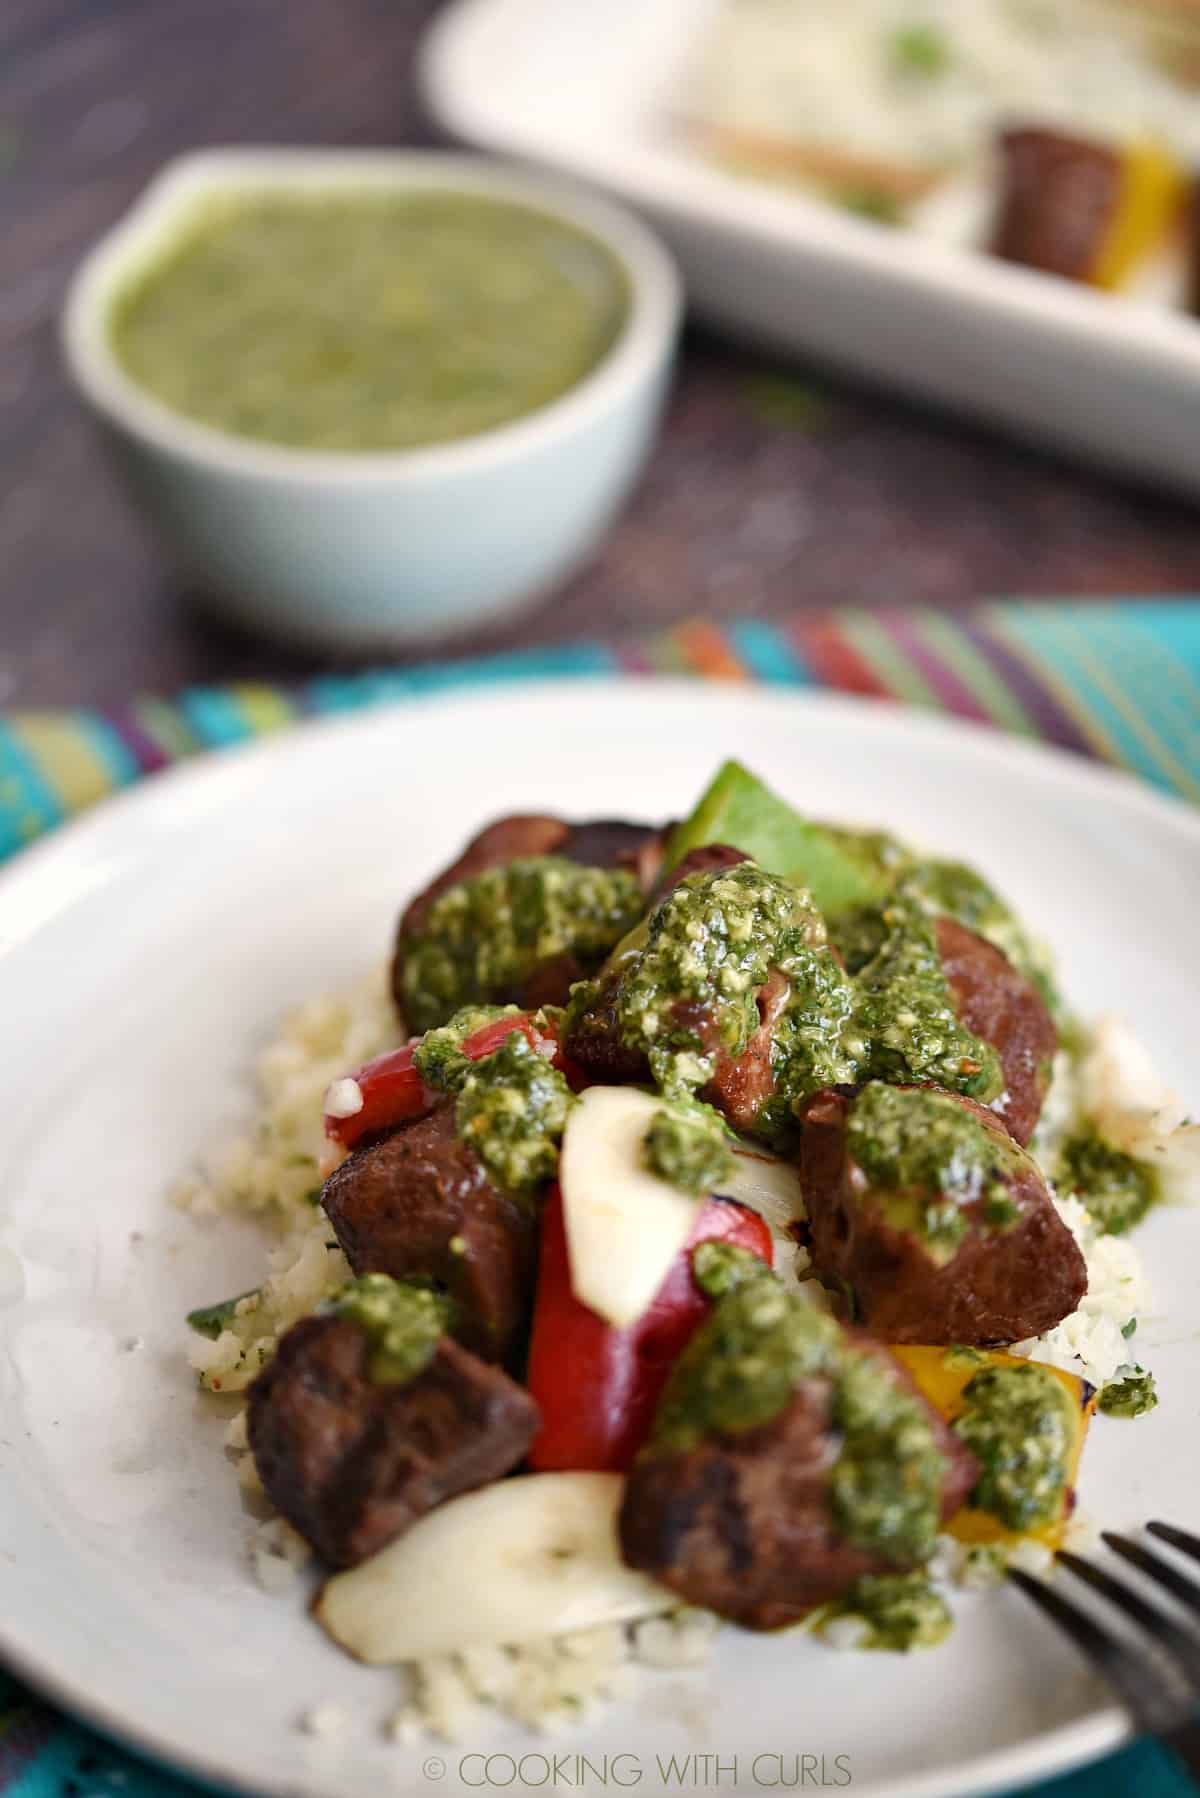 grilled steak, onion and bell peppers on a bed of rice drizzled with chimichurri sauce.